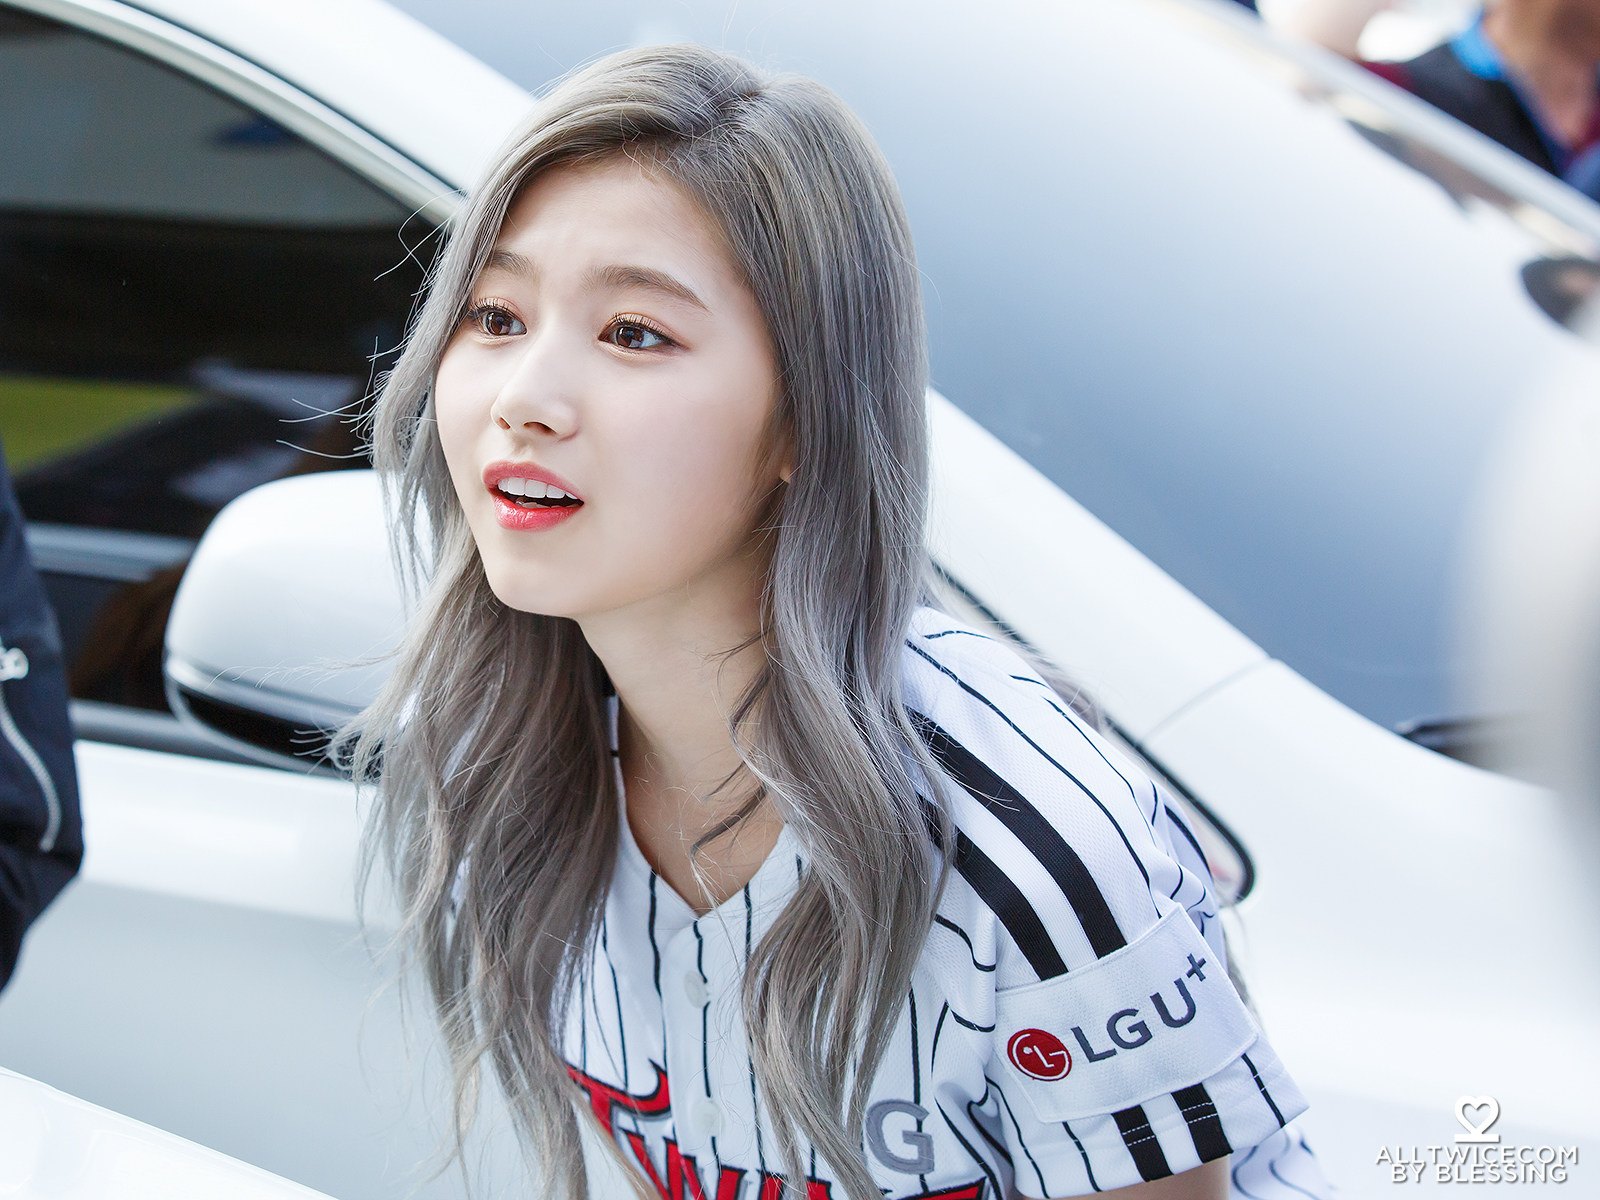 10 Times Sana Changed Her Hair Color Since Debut Koreaboo